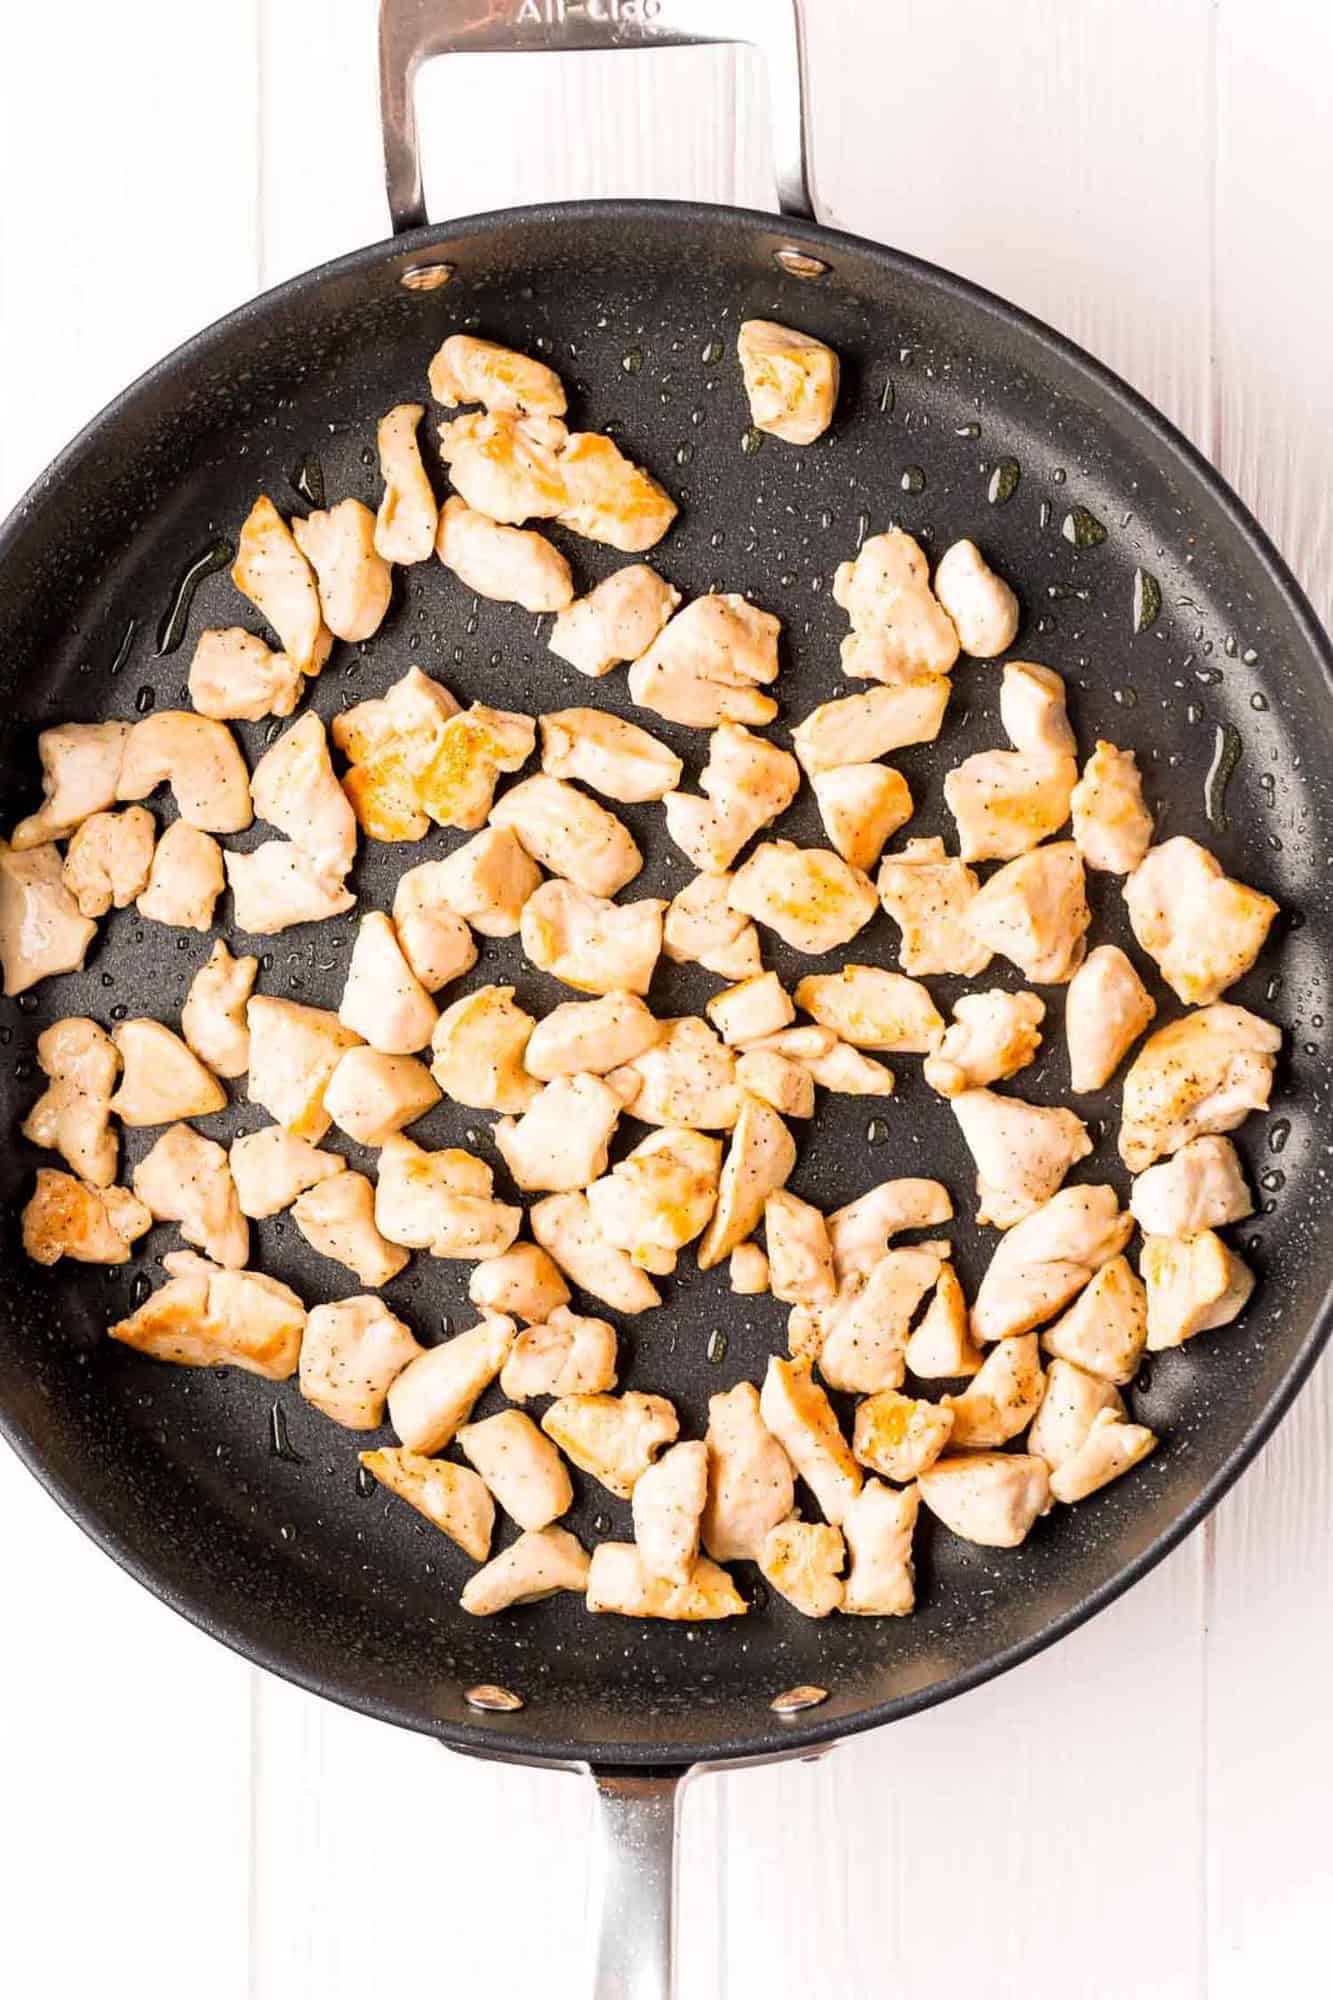 Cooked chicken pieces in a large black skillet.